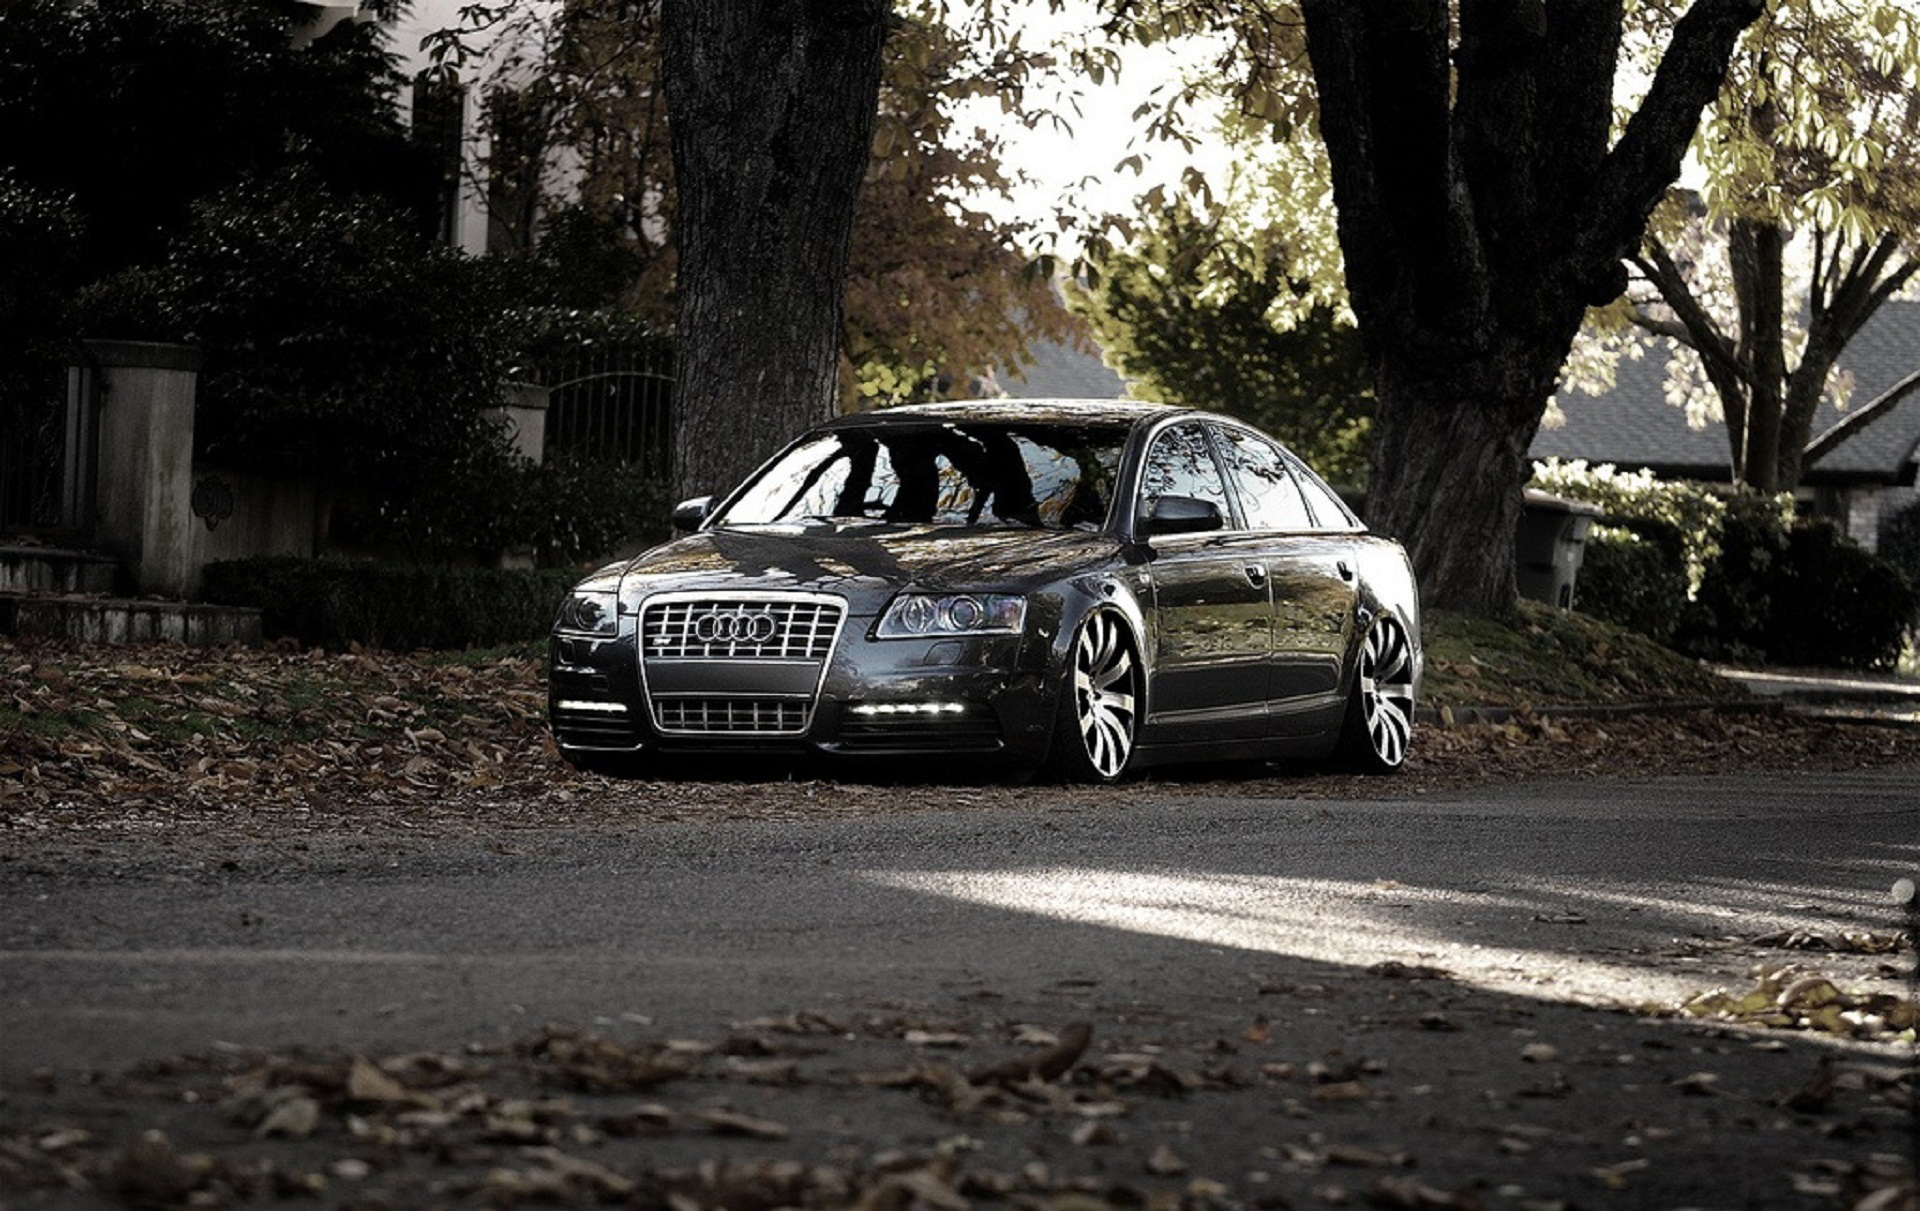 Free Download Audi A6 Wallpapers 1920x1211 For Your Desktop Mobile Tablet Explore 98 Audi A6 Wallpapers Audi A6 Wallpapers Audi A6 Allroad Audi A6 Wallpaper